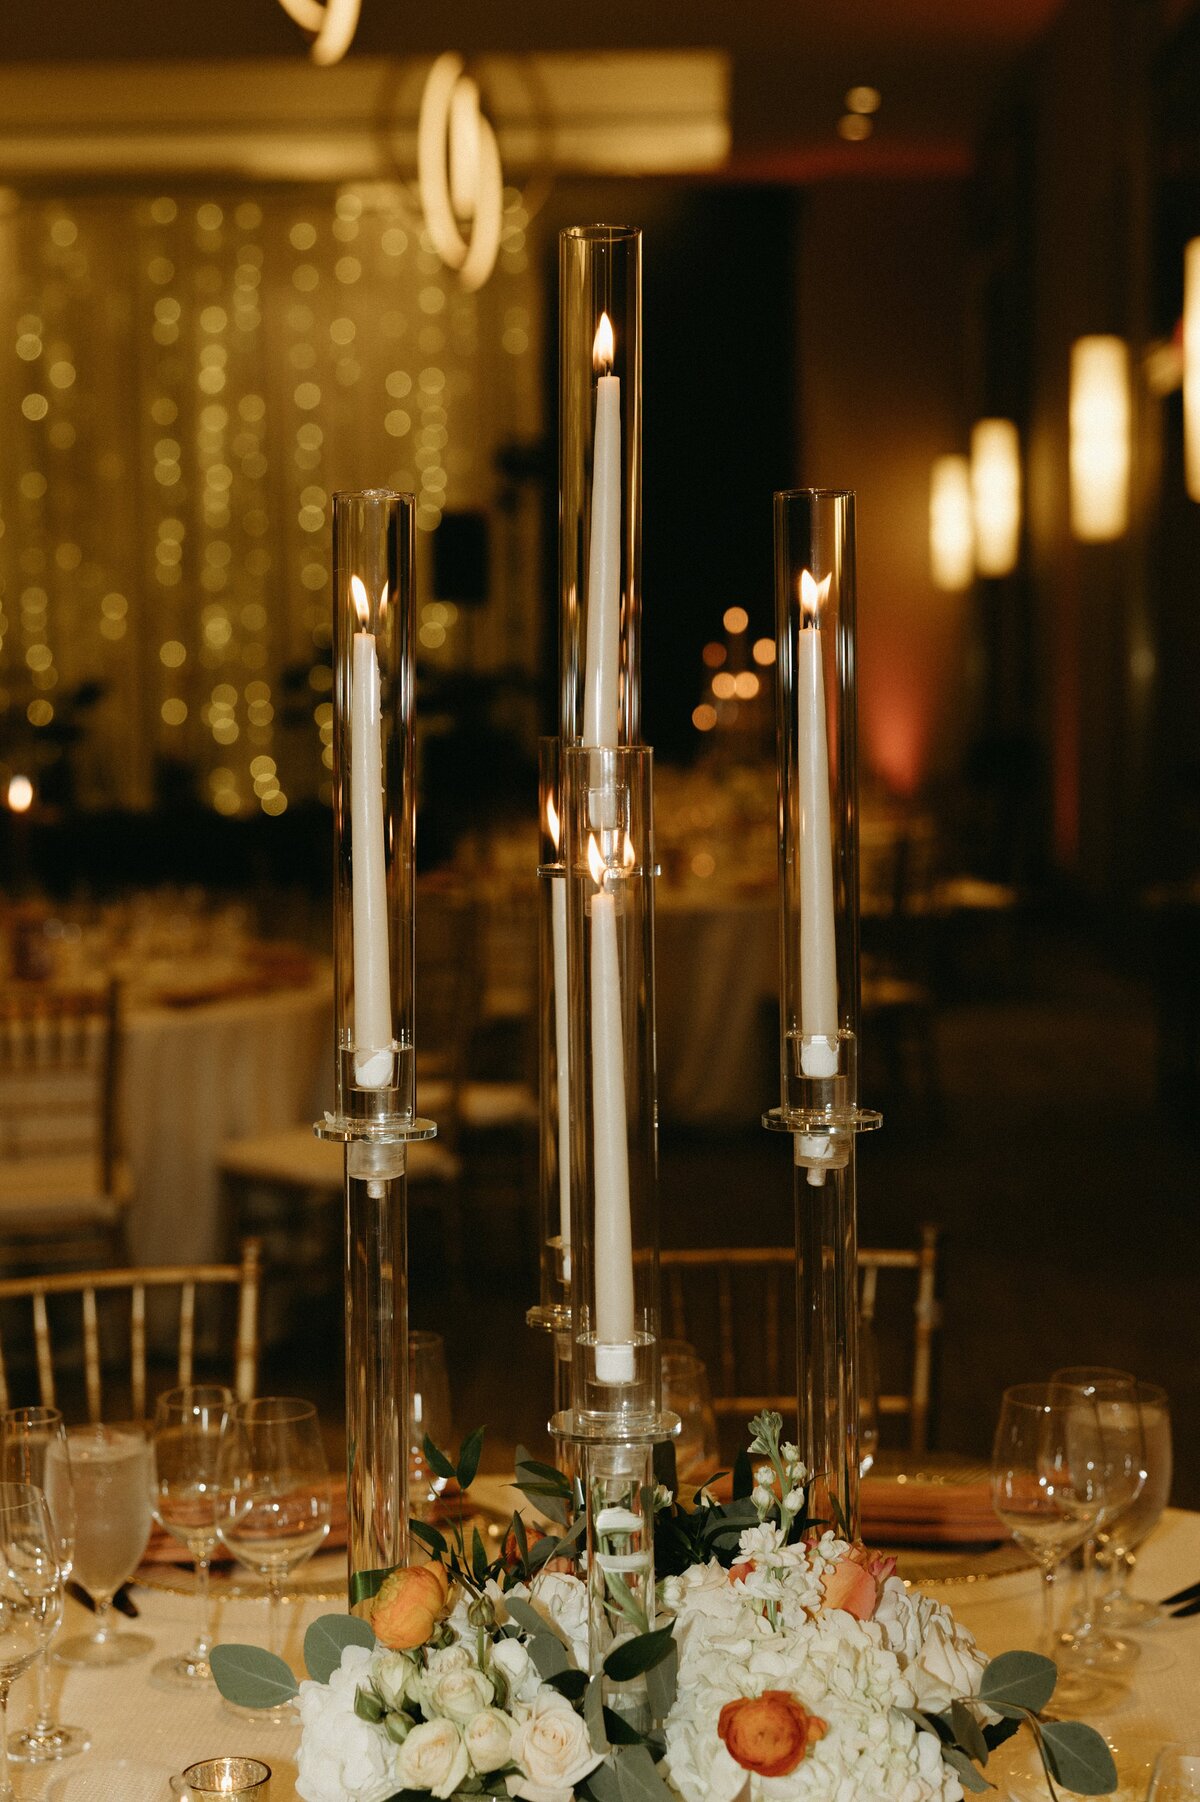 Event-Planning-DC-Washington-Dc-Wedding-Intercontinental-Wharf-Lexi-Truesdale-tablescape-candles